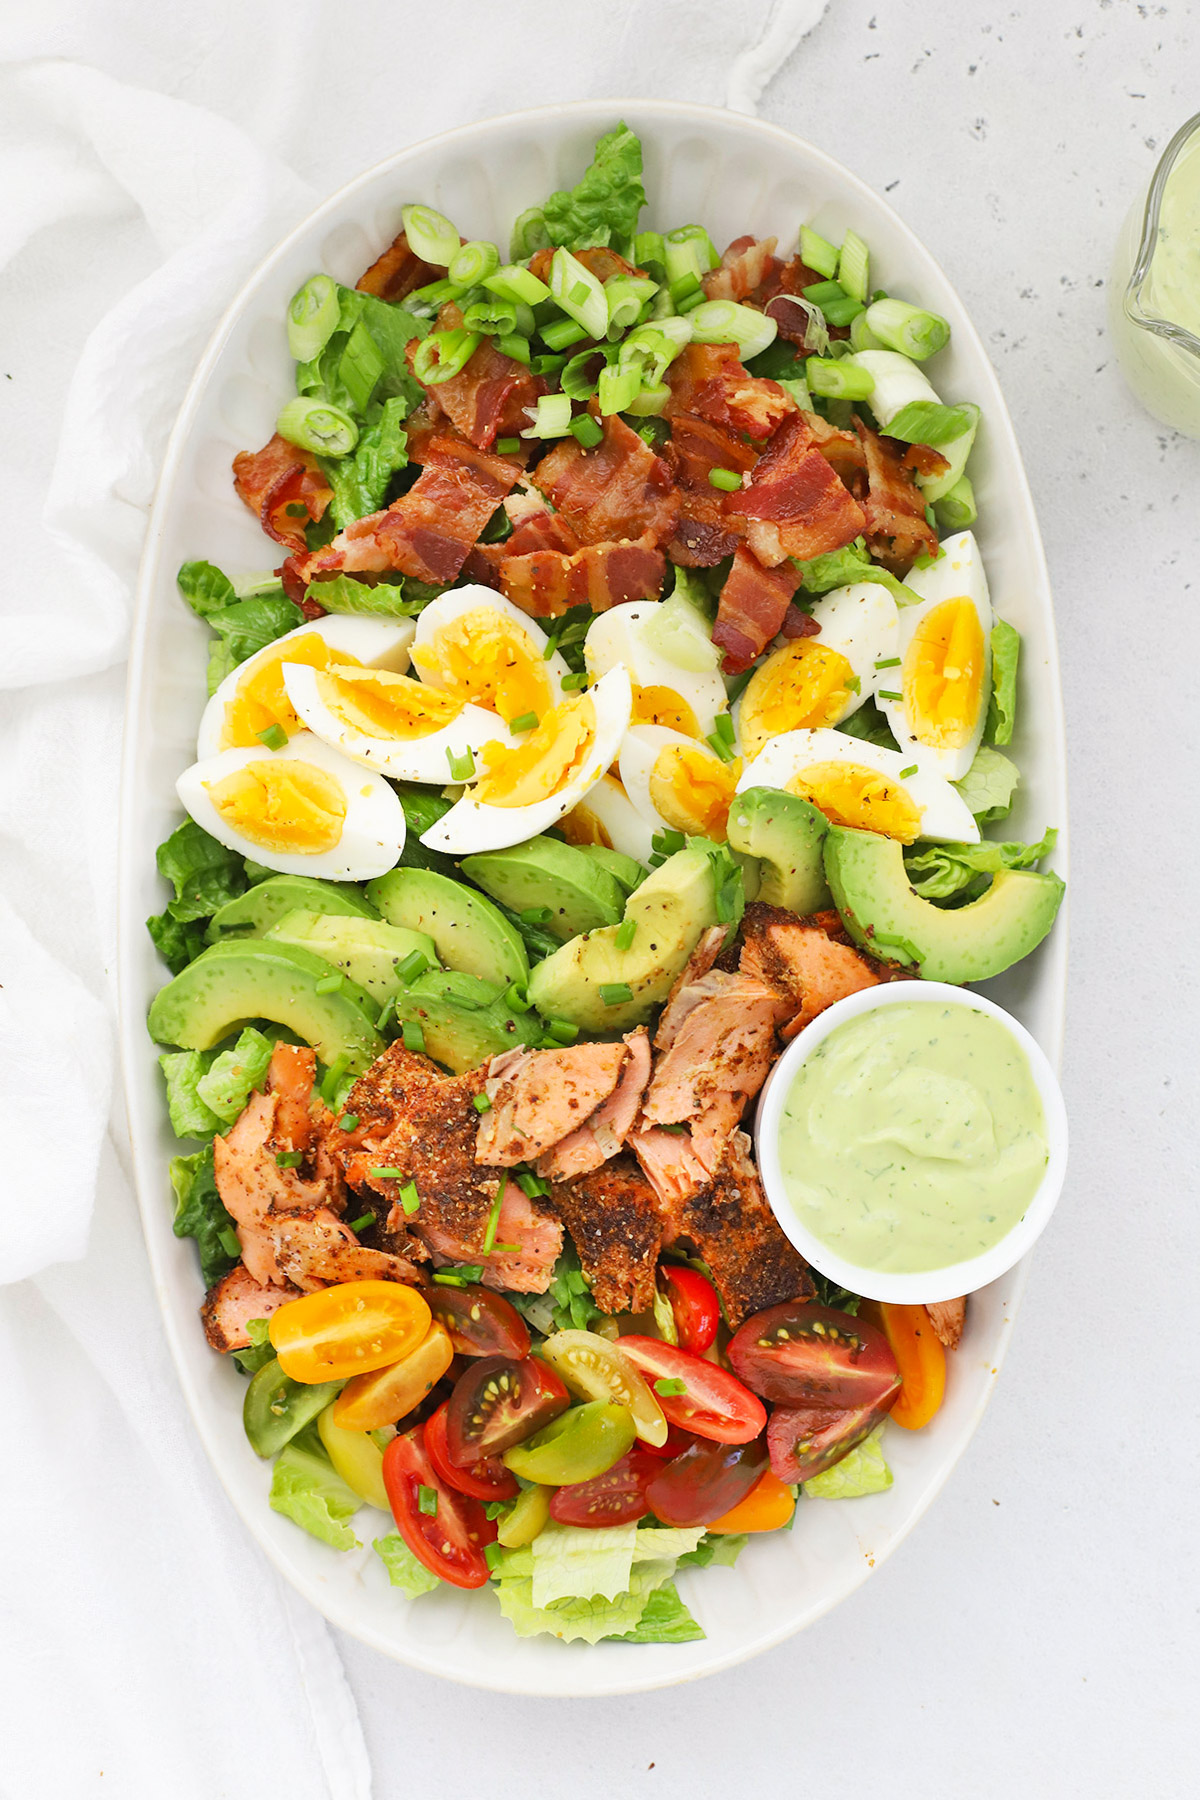 Overhead view of a big platter of blackened salmon cobb salad with colorful ingredients arranged in rows.